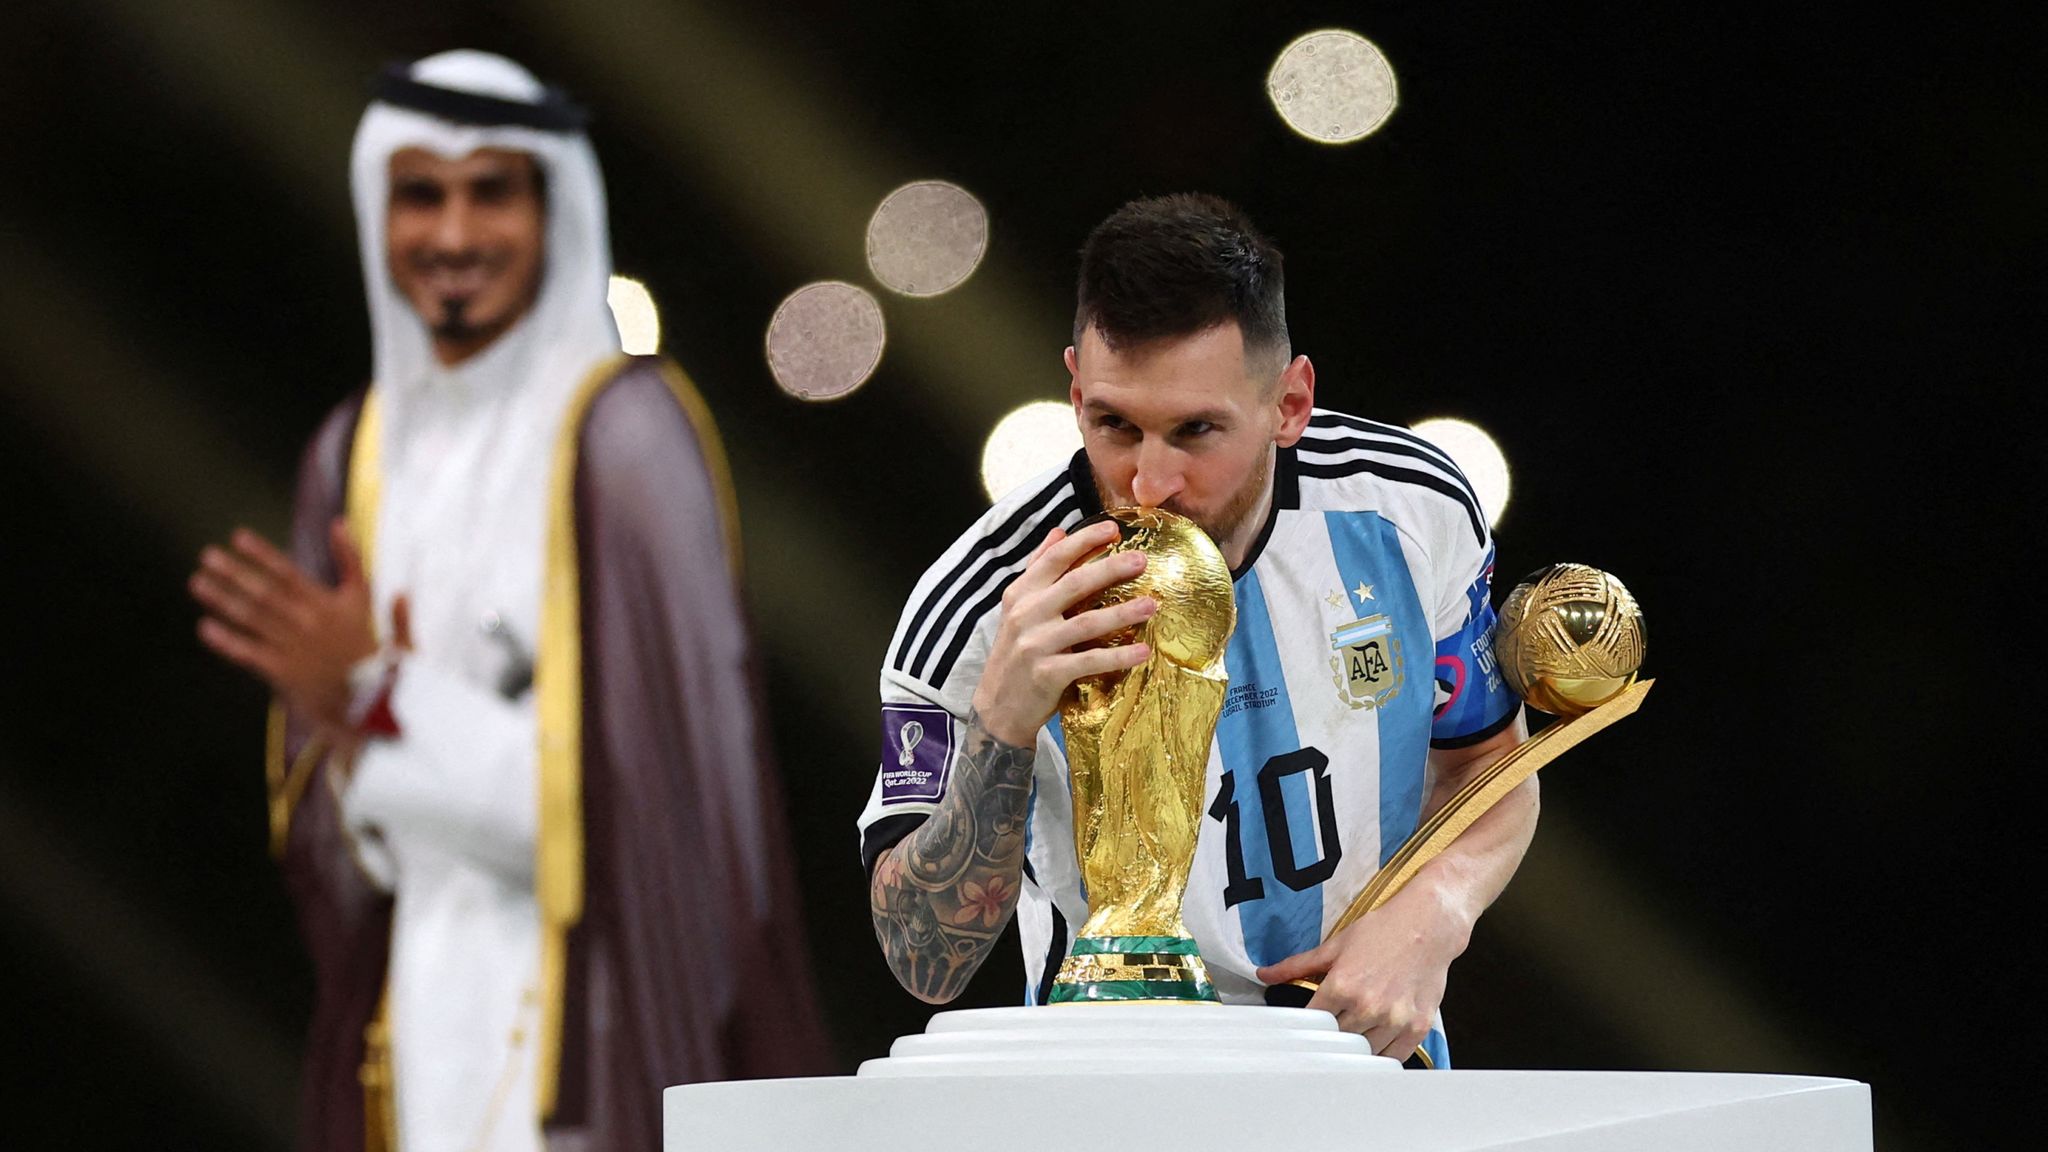 The brilliant forward has 793 goals to his name for both club and country, but his cool finishes in the Qatar final may have been the most satisfying of his career.